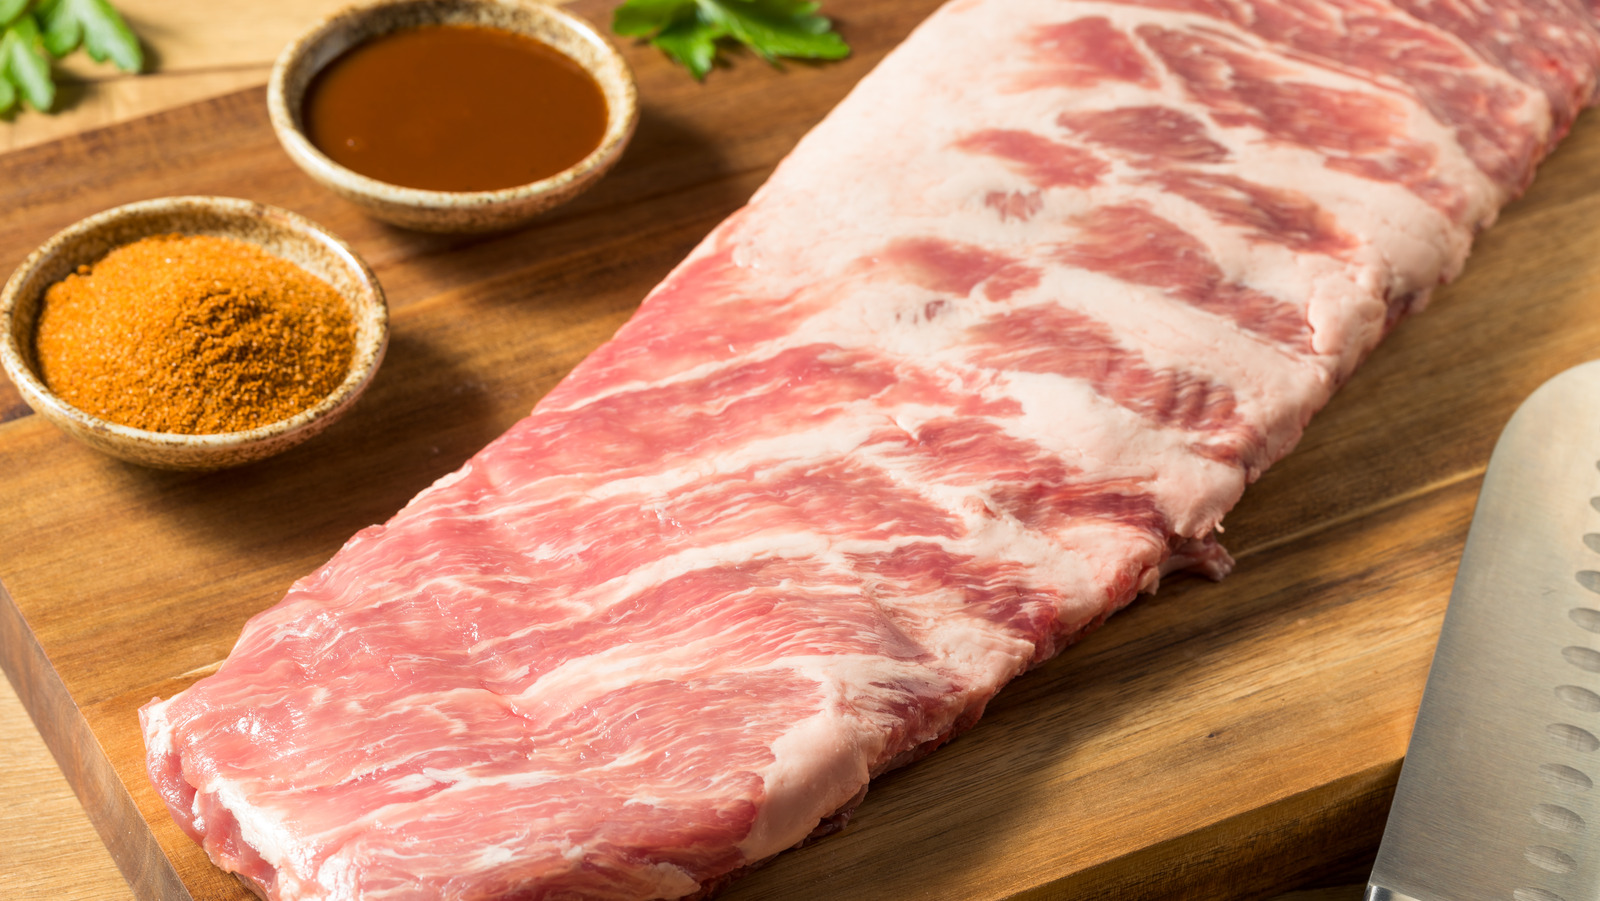 What is the difference between St. Louis style ribs and other ribs